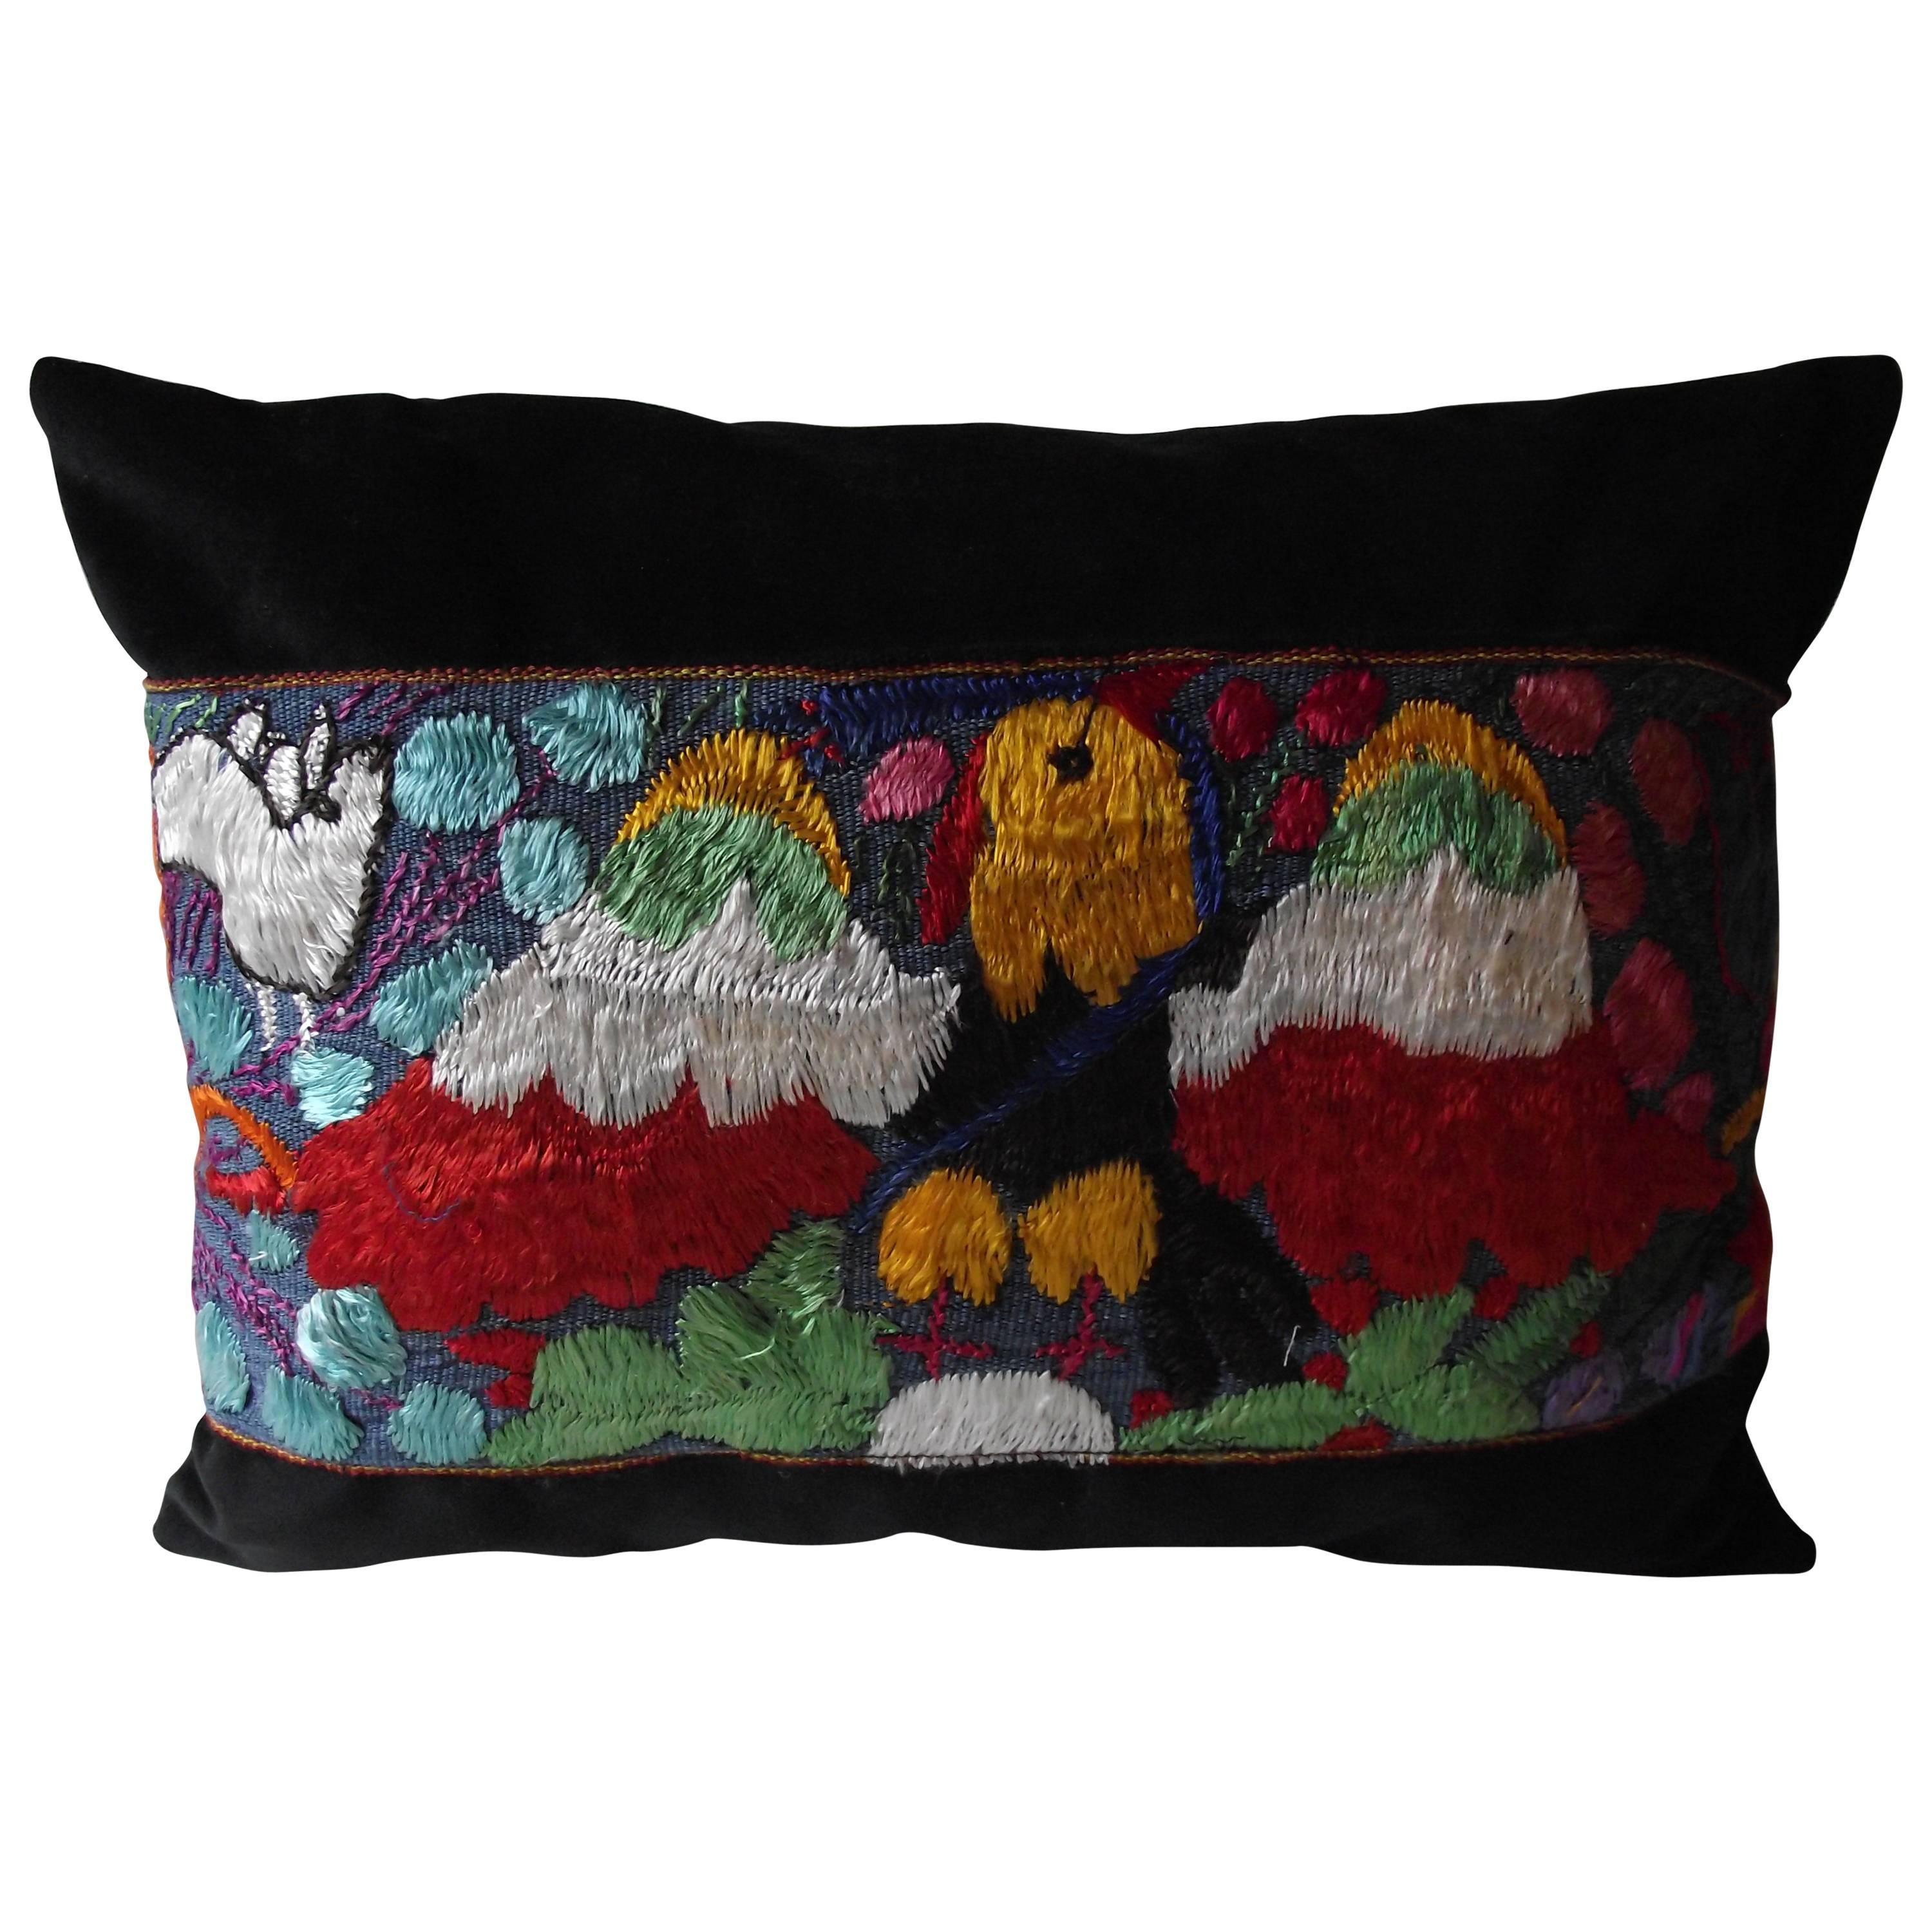 Throw Pillow with Antique Peruvian Ceremonial Mantle, Bolster or Lumbar For Sale